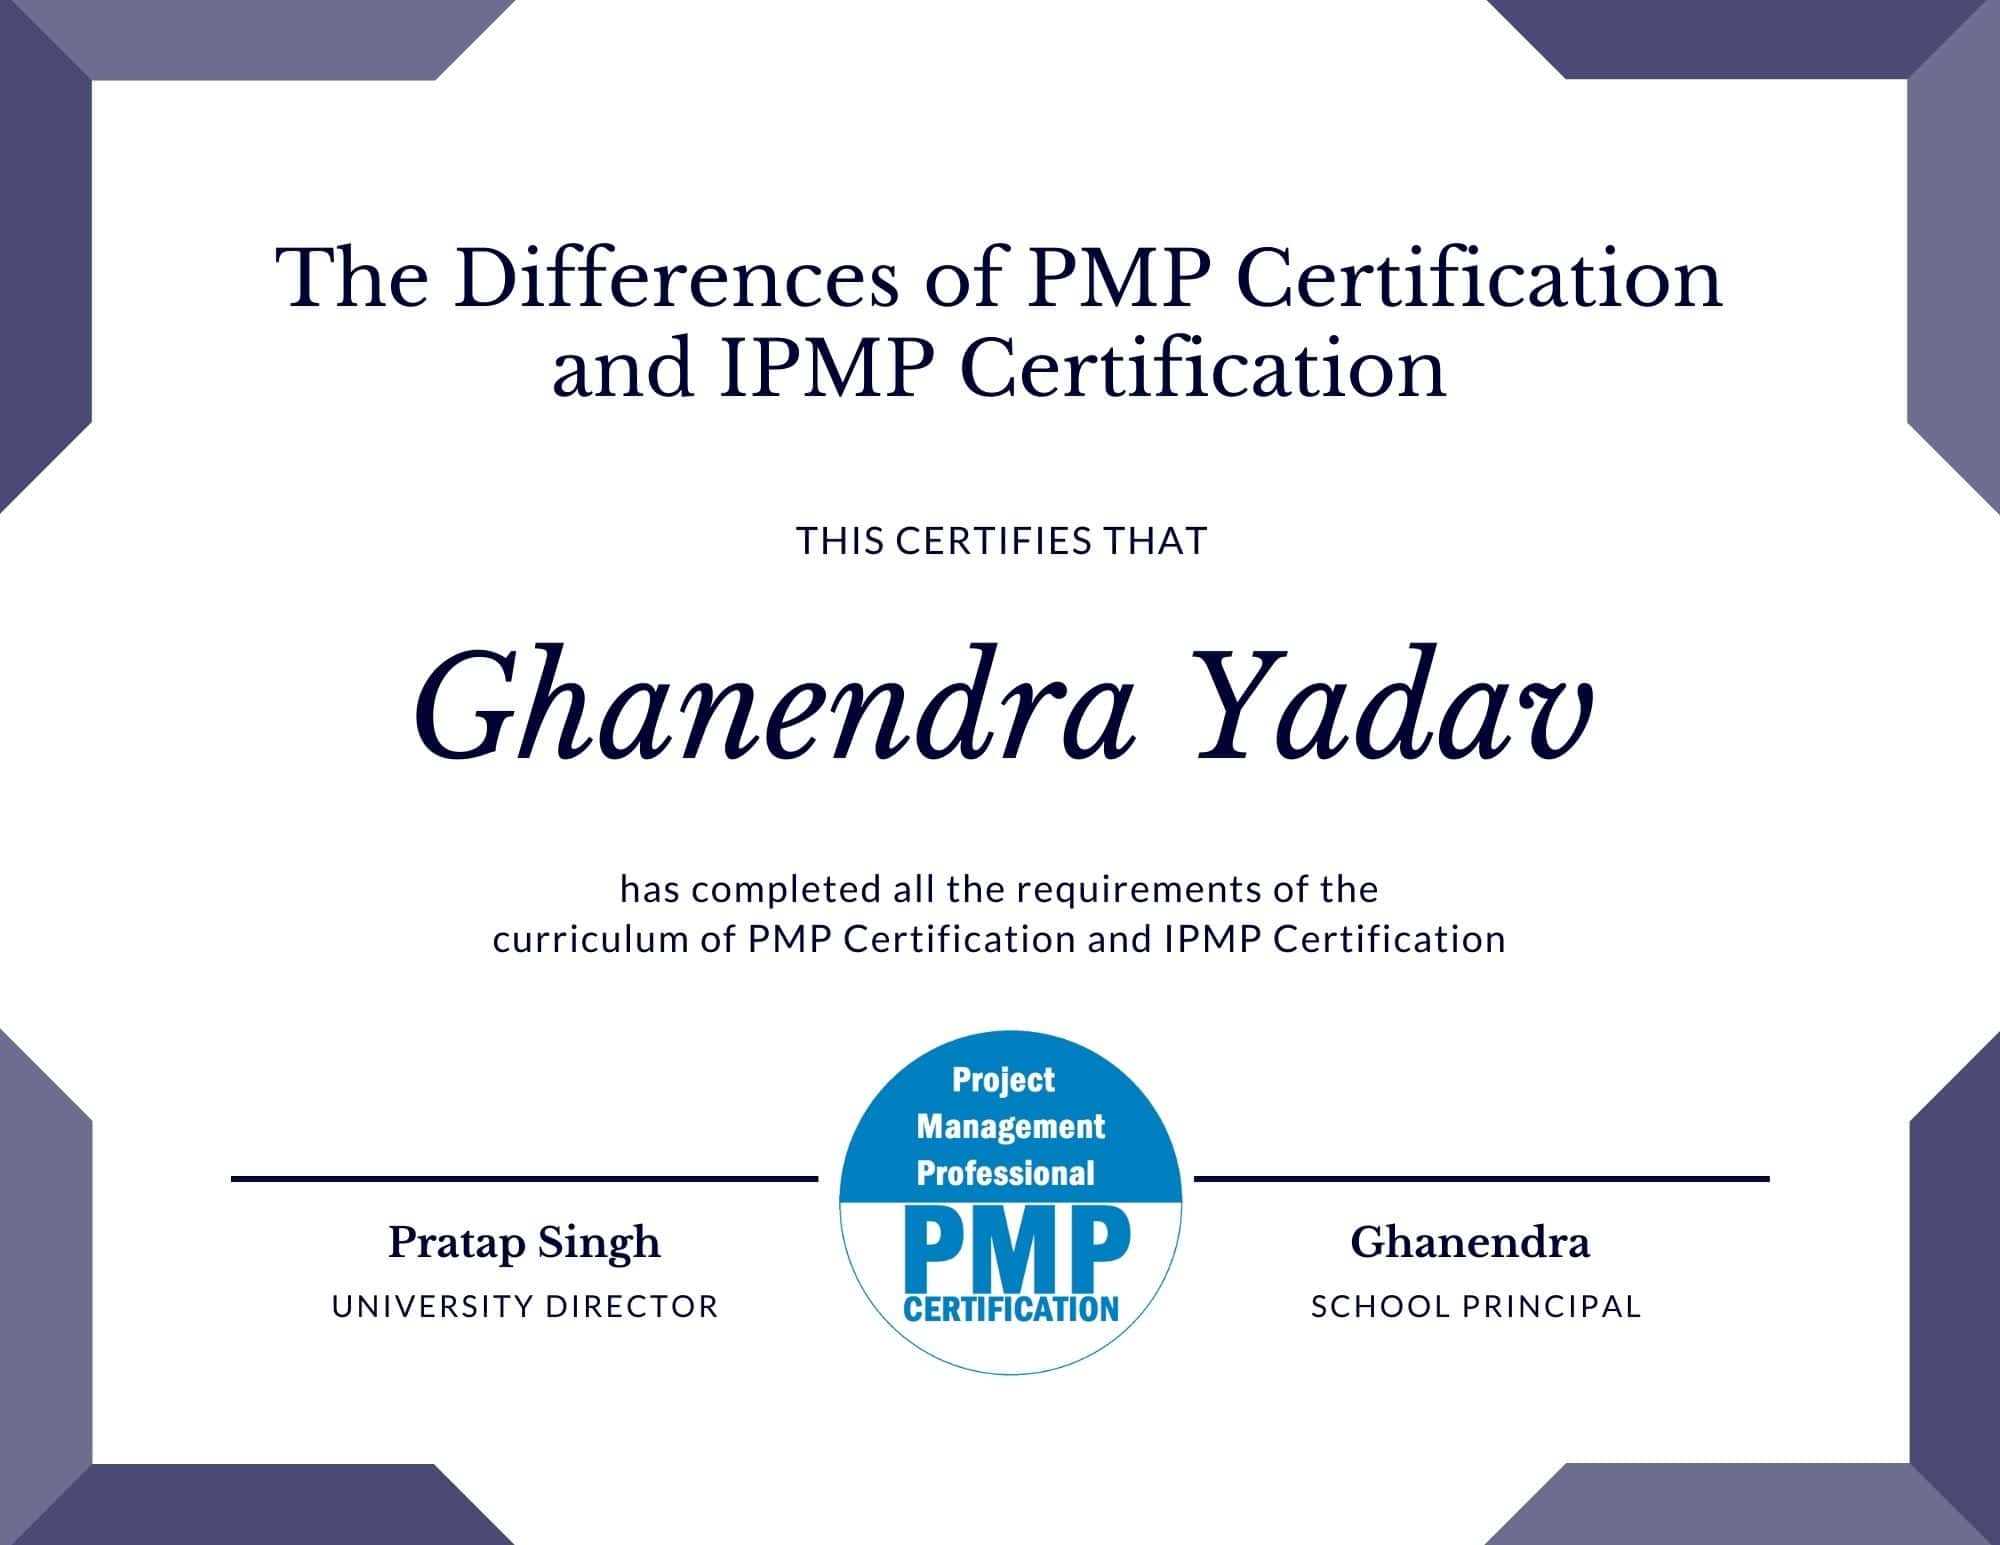 The Differences of PMP Certification and IPMP Certification